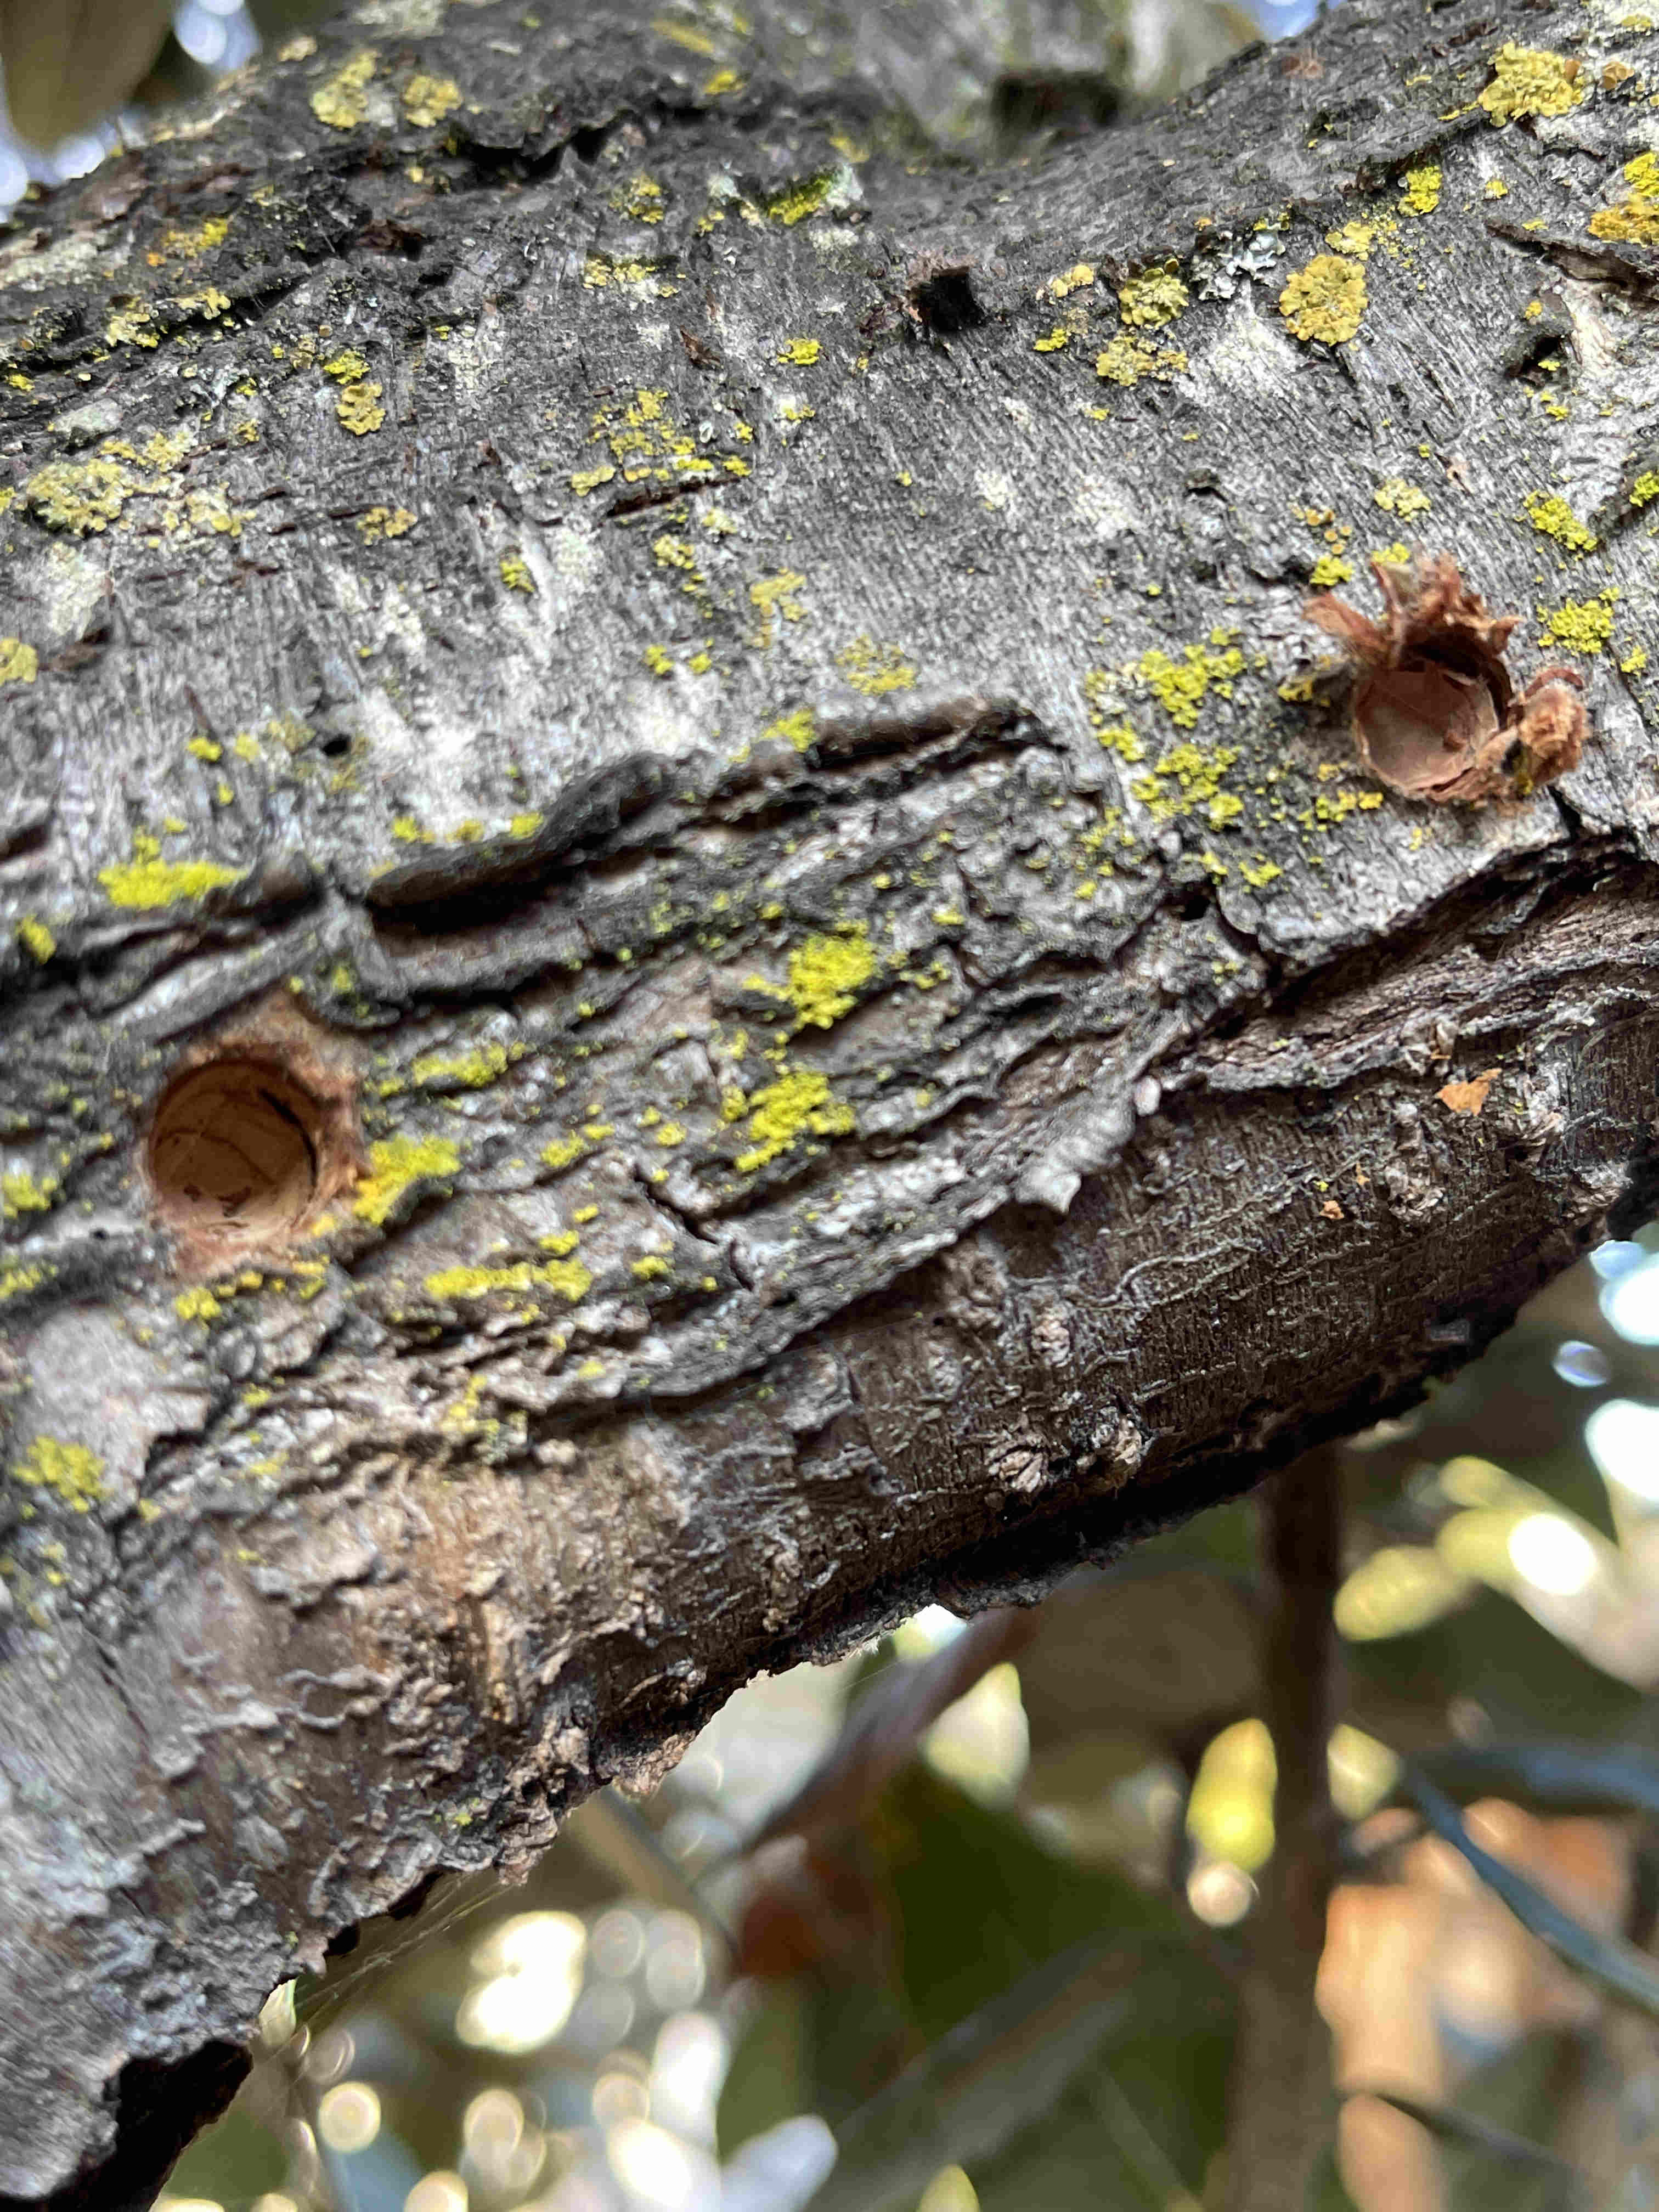 Two leafcutter bee nesting sites tunnels drilled into a snag